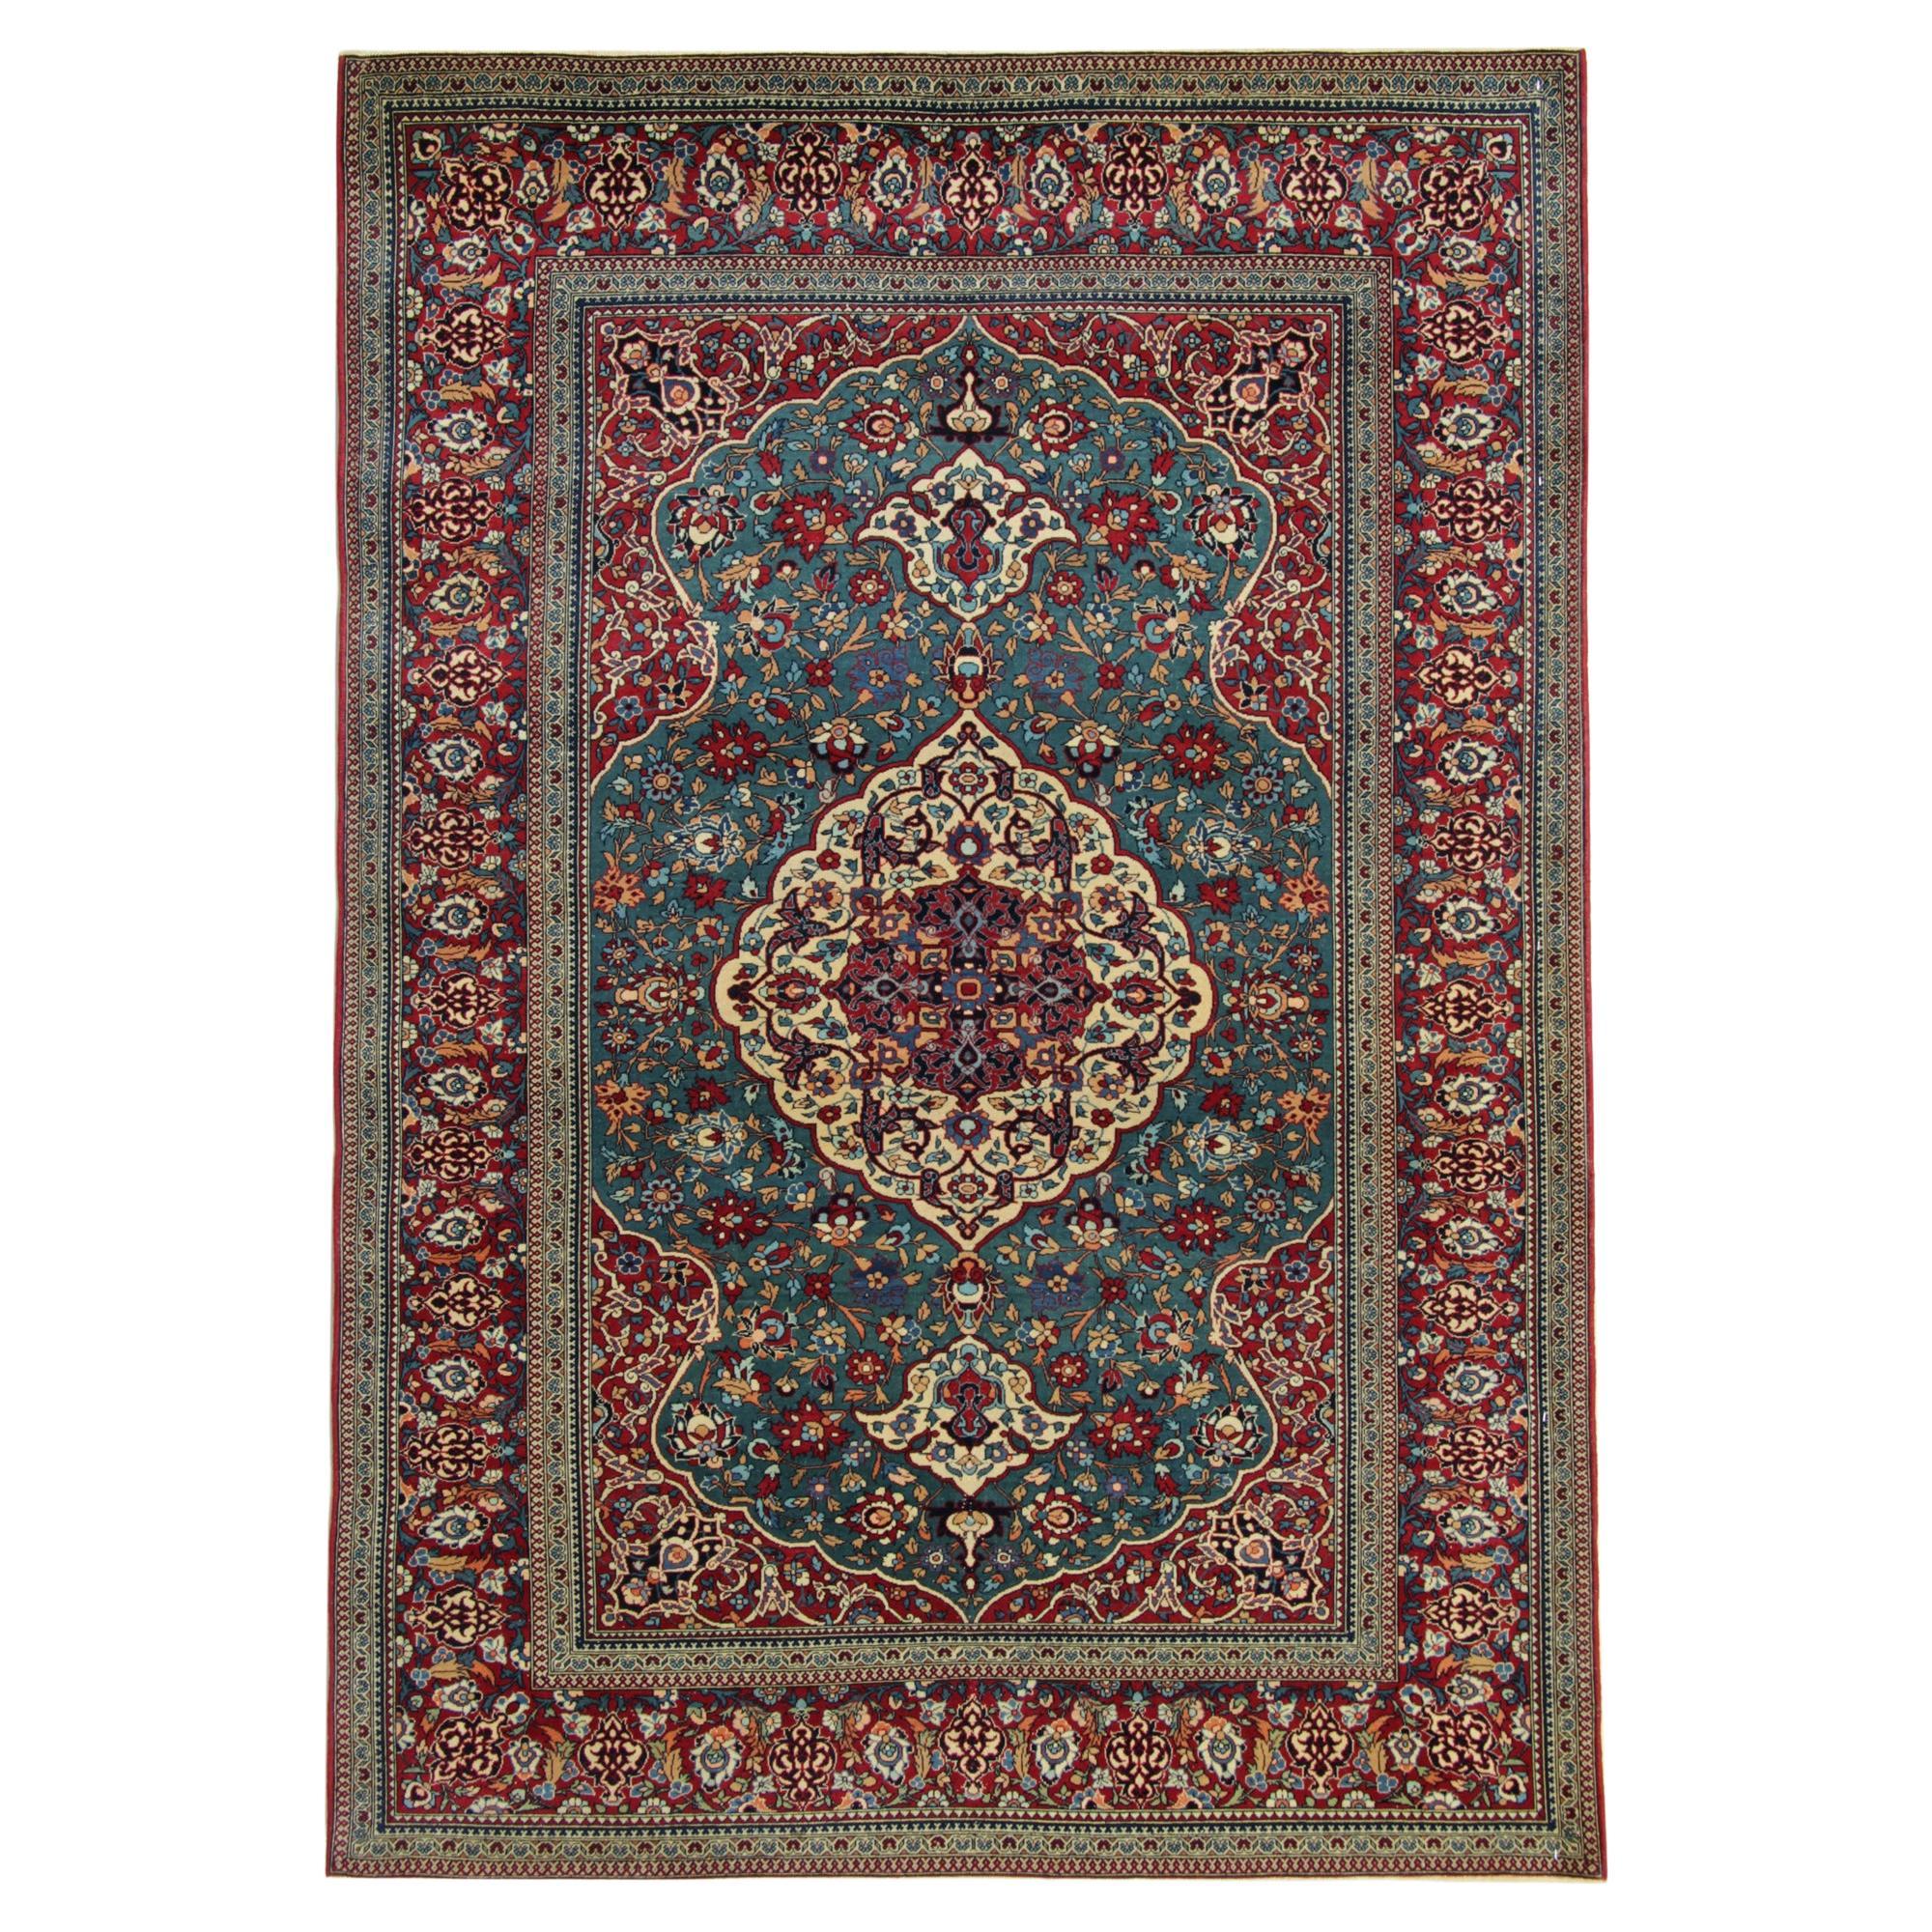 Traditional Rug Handmade Teal Wool Carpet Oriental Antique Area Rug For Sale